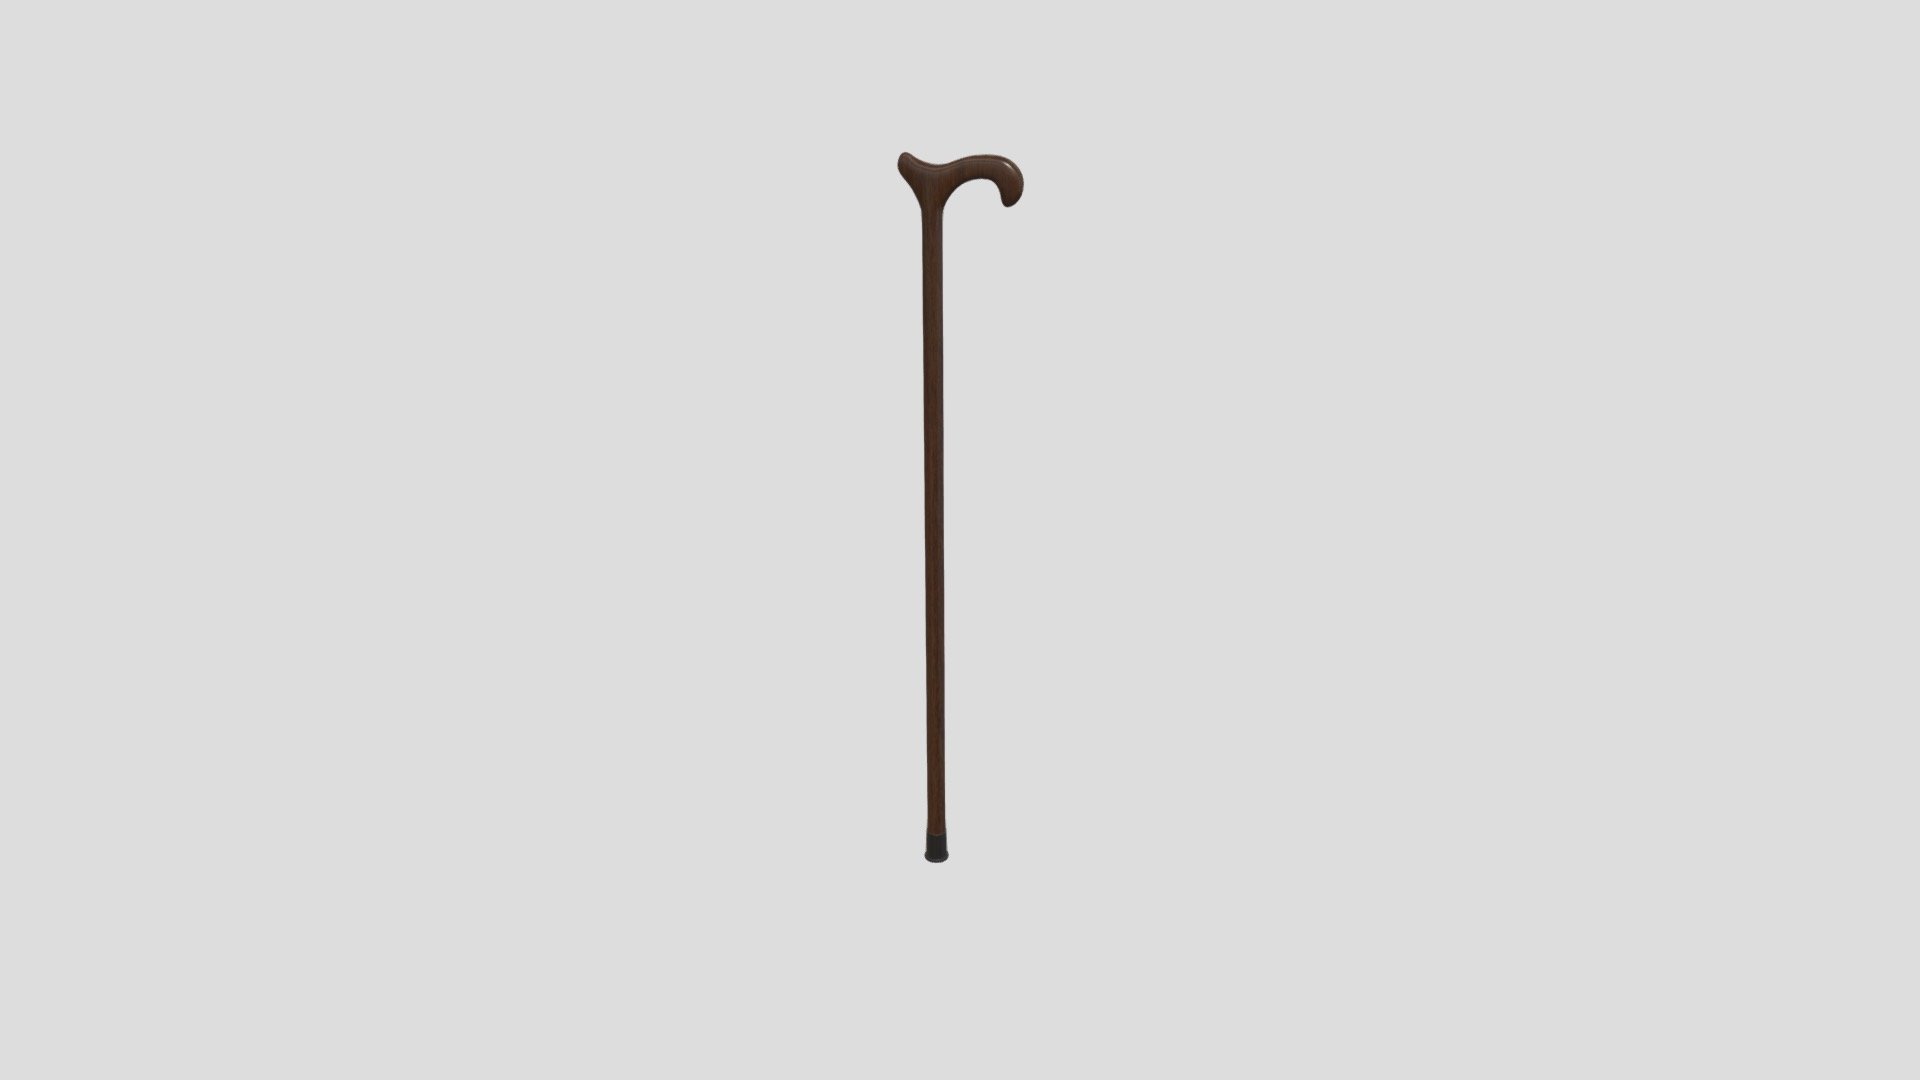 Subdivision Level: 1

Non-Mirrored.

Textures: 1024 x 1024, Two colors on texture: Dark Grey, Dark wooden.

Materials: 1 - Walking Stick

Formats: .stl .obj .fbx .dae 

Origin located on handle-center

Polygons: 13400

Vertices: 6702

I hope you enjoy the model! - Walking Stick - Buy Royalty Free 3D model by Ed+ (@EDplus) 3d model